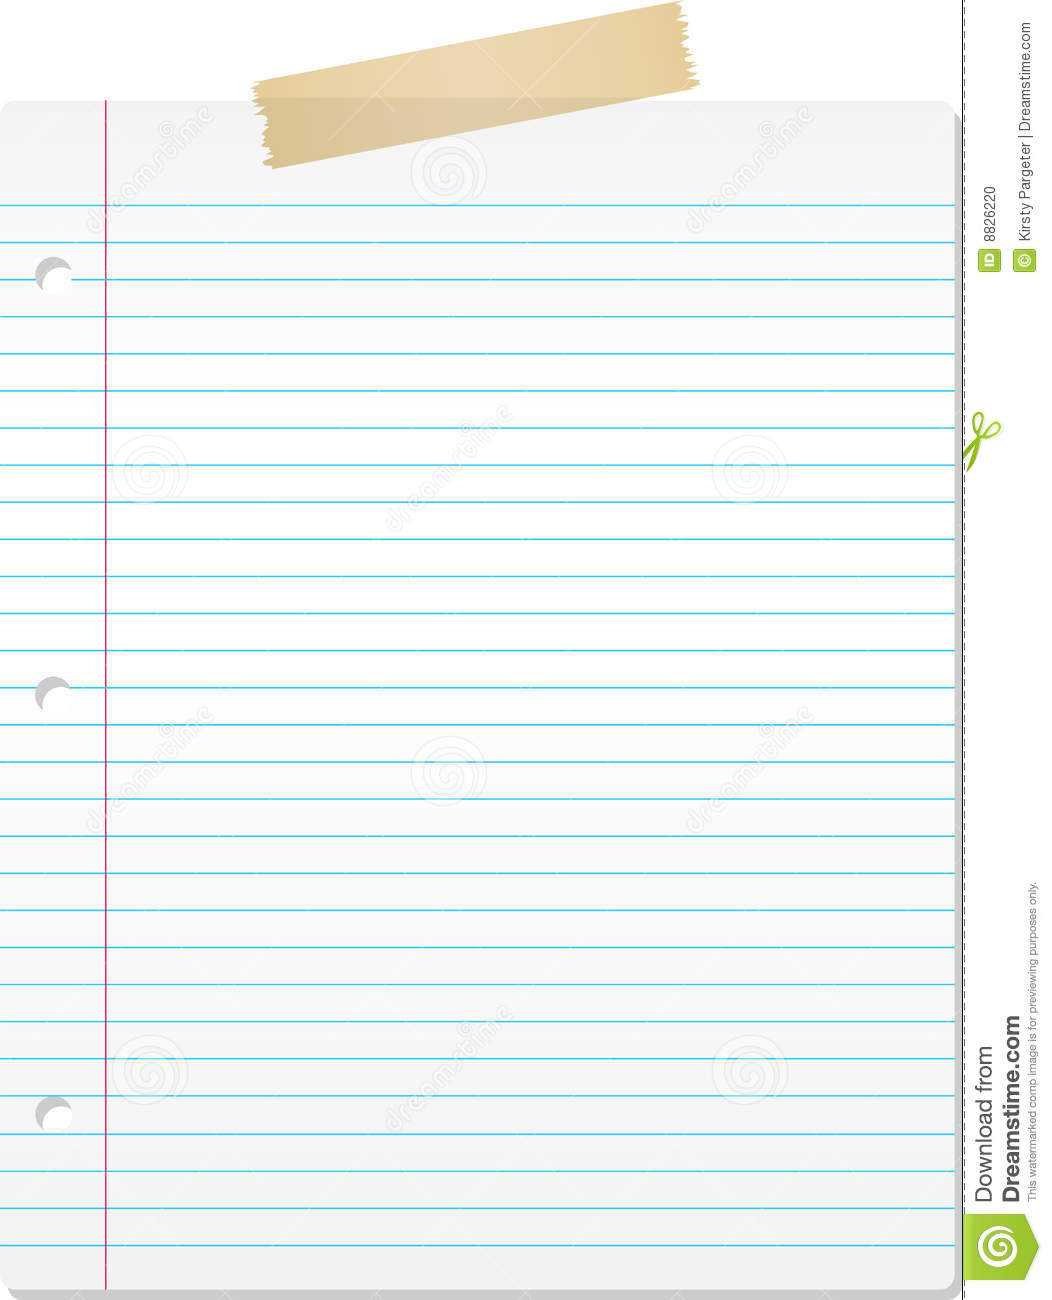 026 Microsoft Word Lined Paper Template Ideas Fantastic Doc Regarding Microsoft Word Lined Paper Template